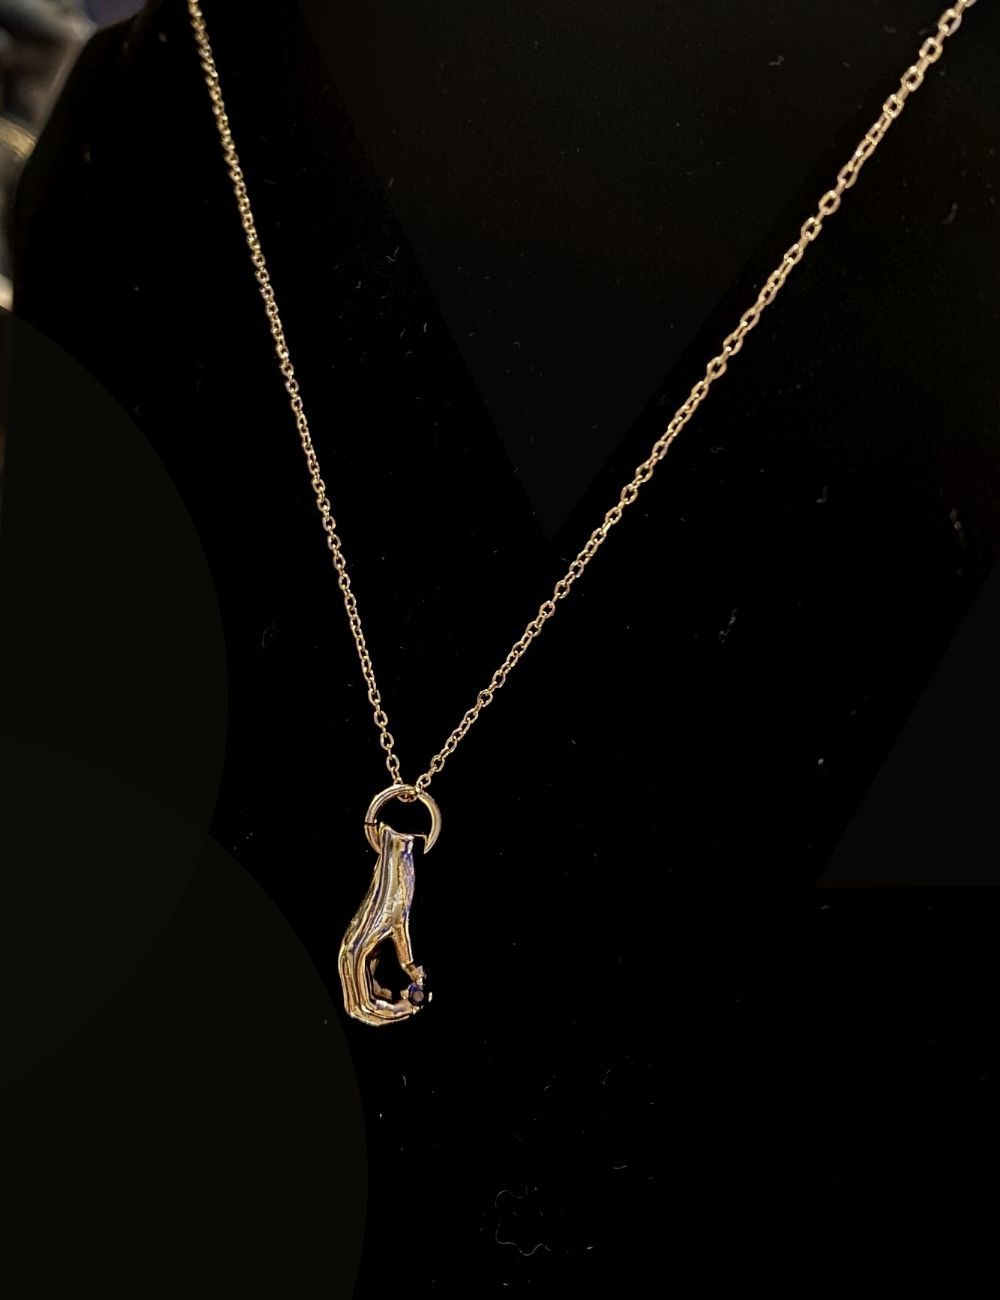 Necklace Bethroted - Gold Plated